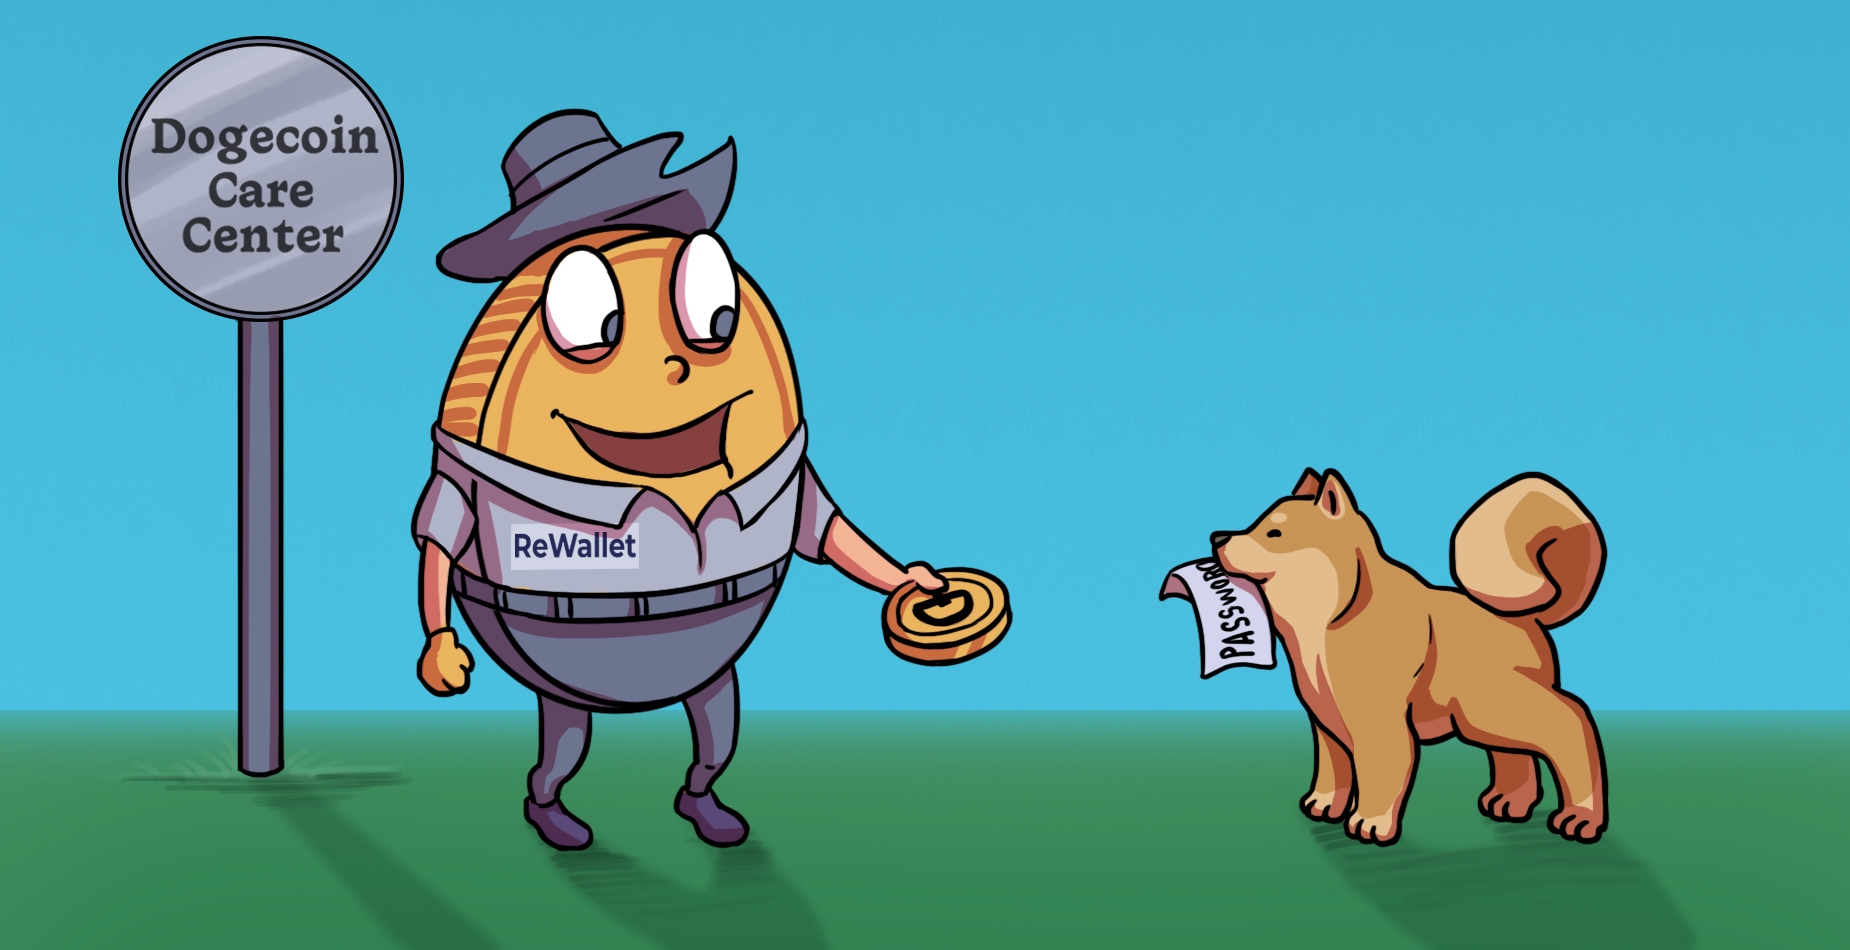 A shiba inu dog, exchanging the sheet of paper he is holding in his mouth with a coin dressed as a zookeeper.